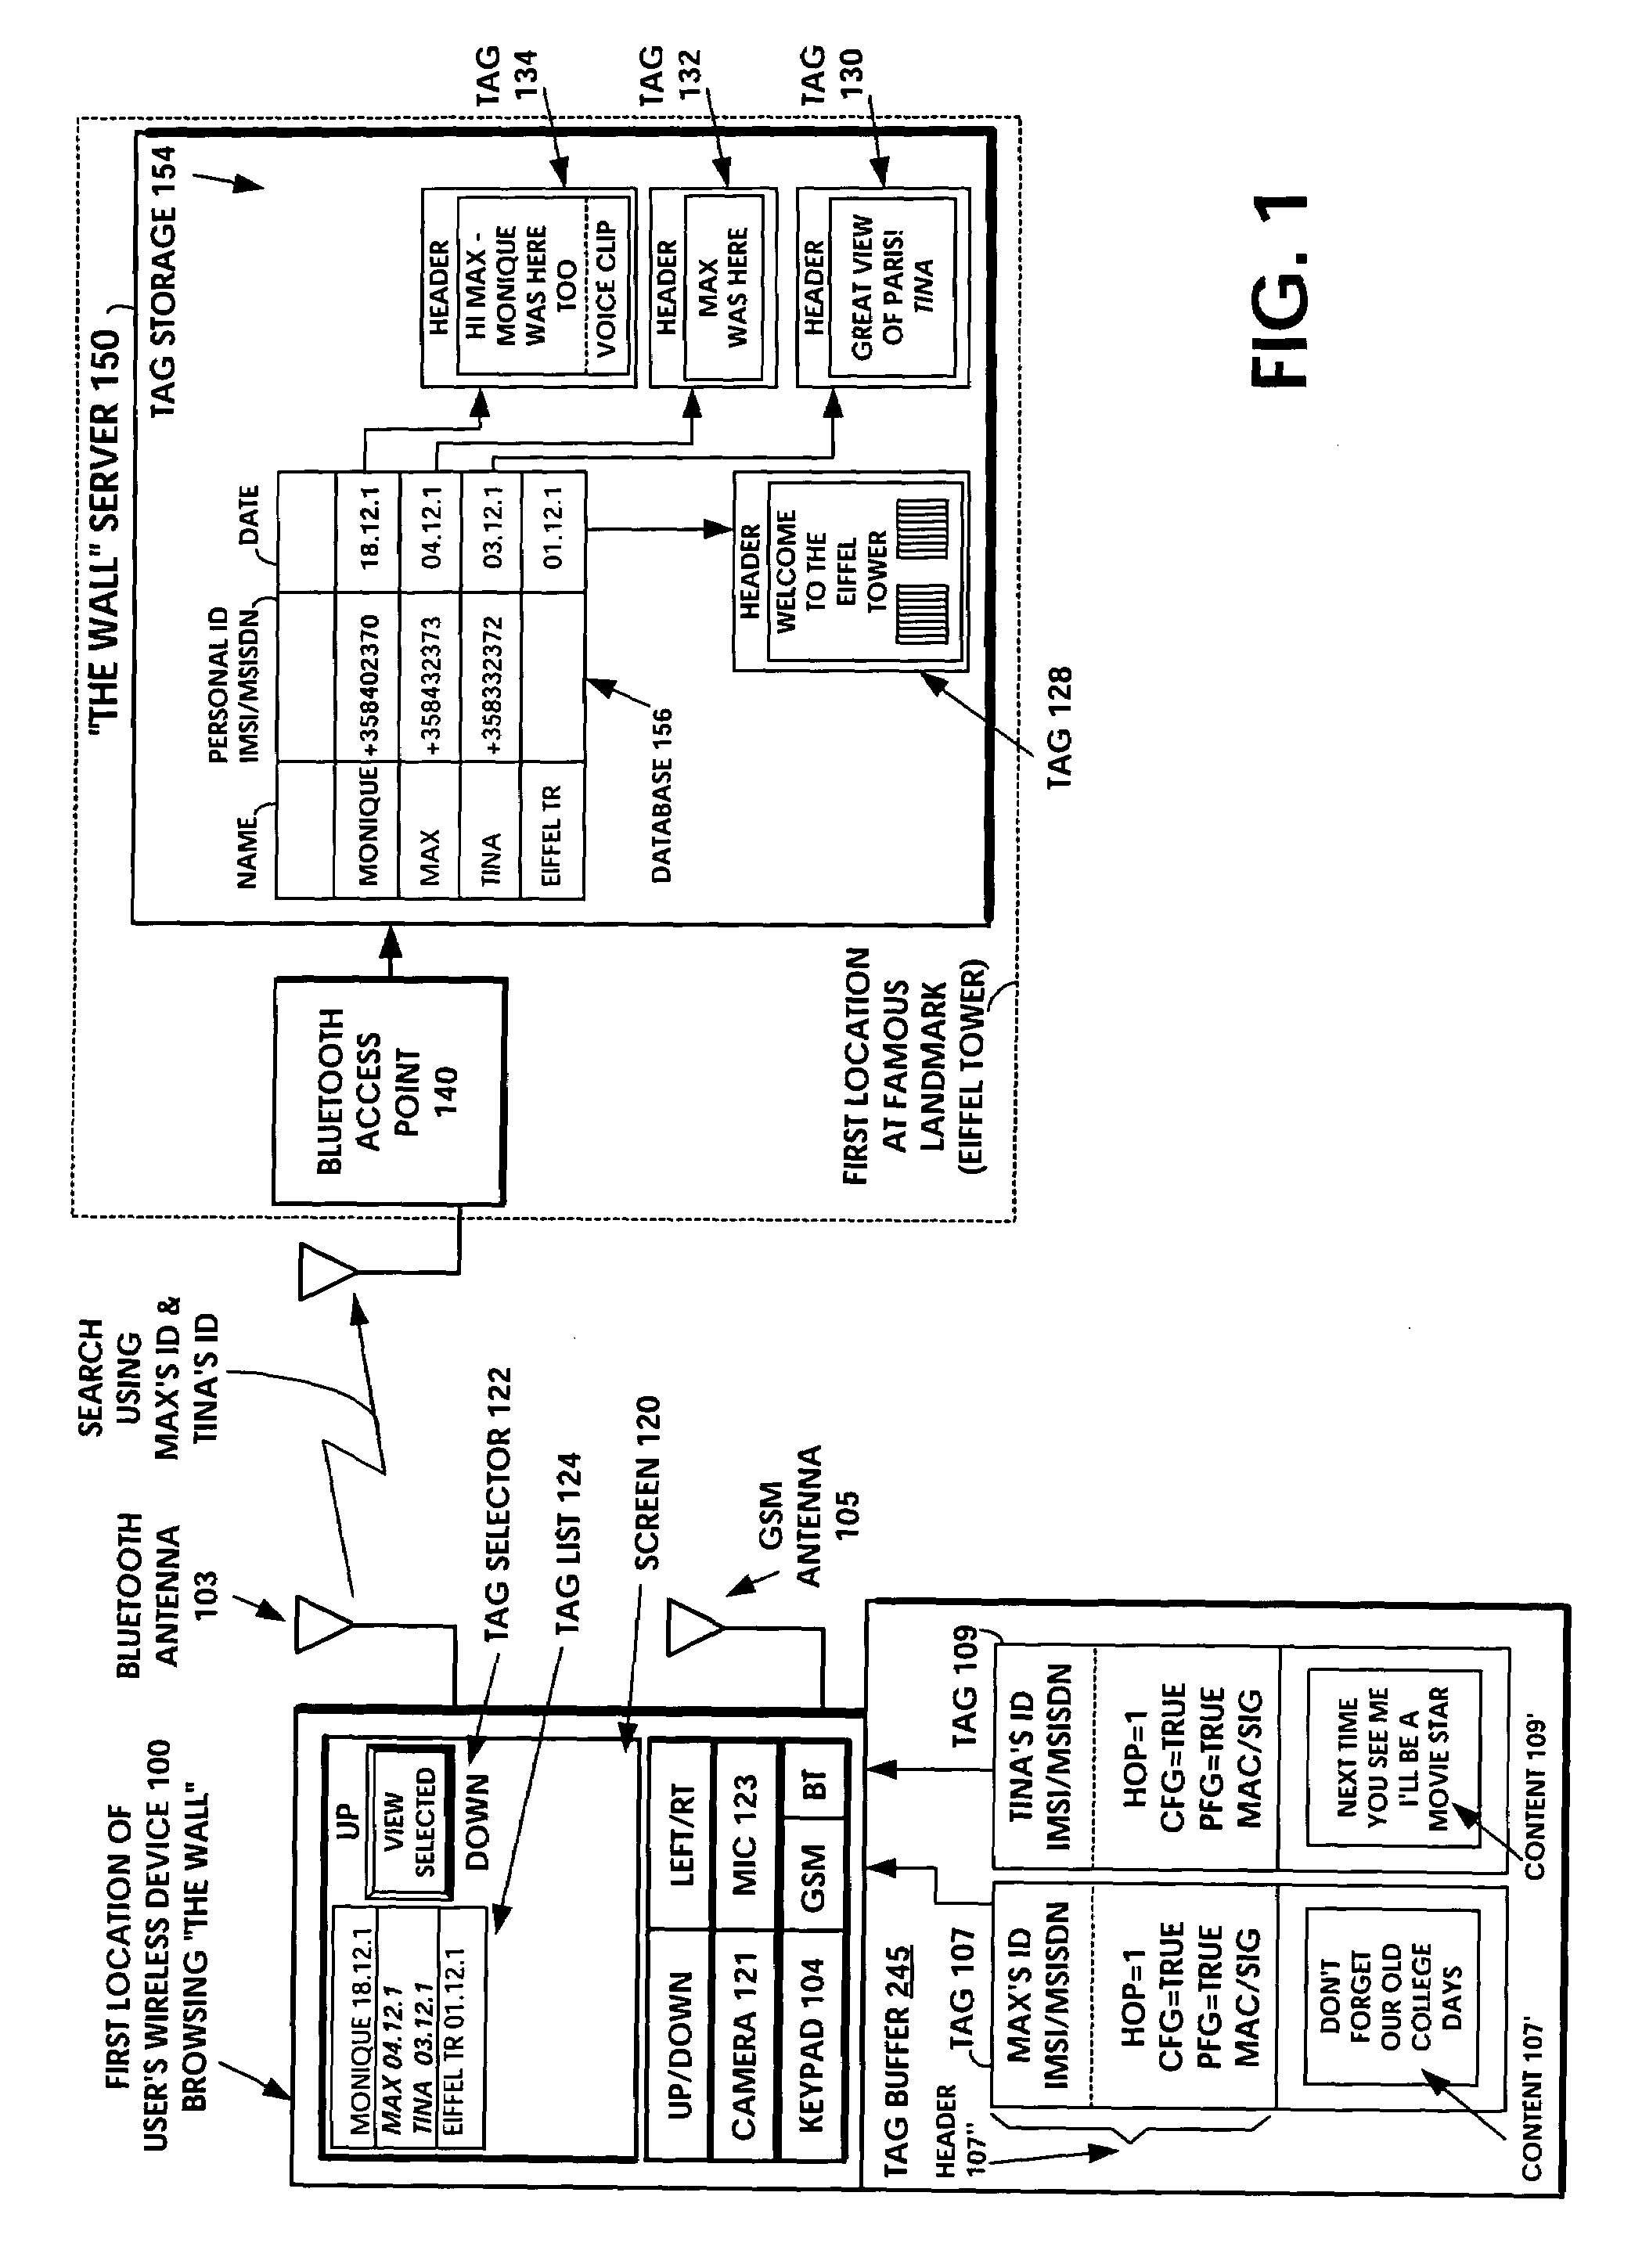 Short-range wireless system and method for multimedia tags